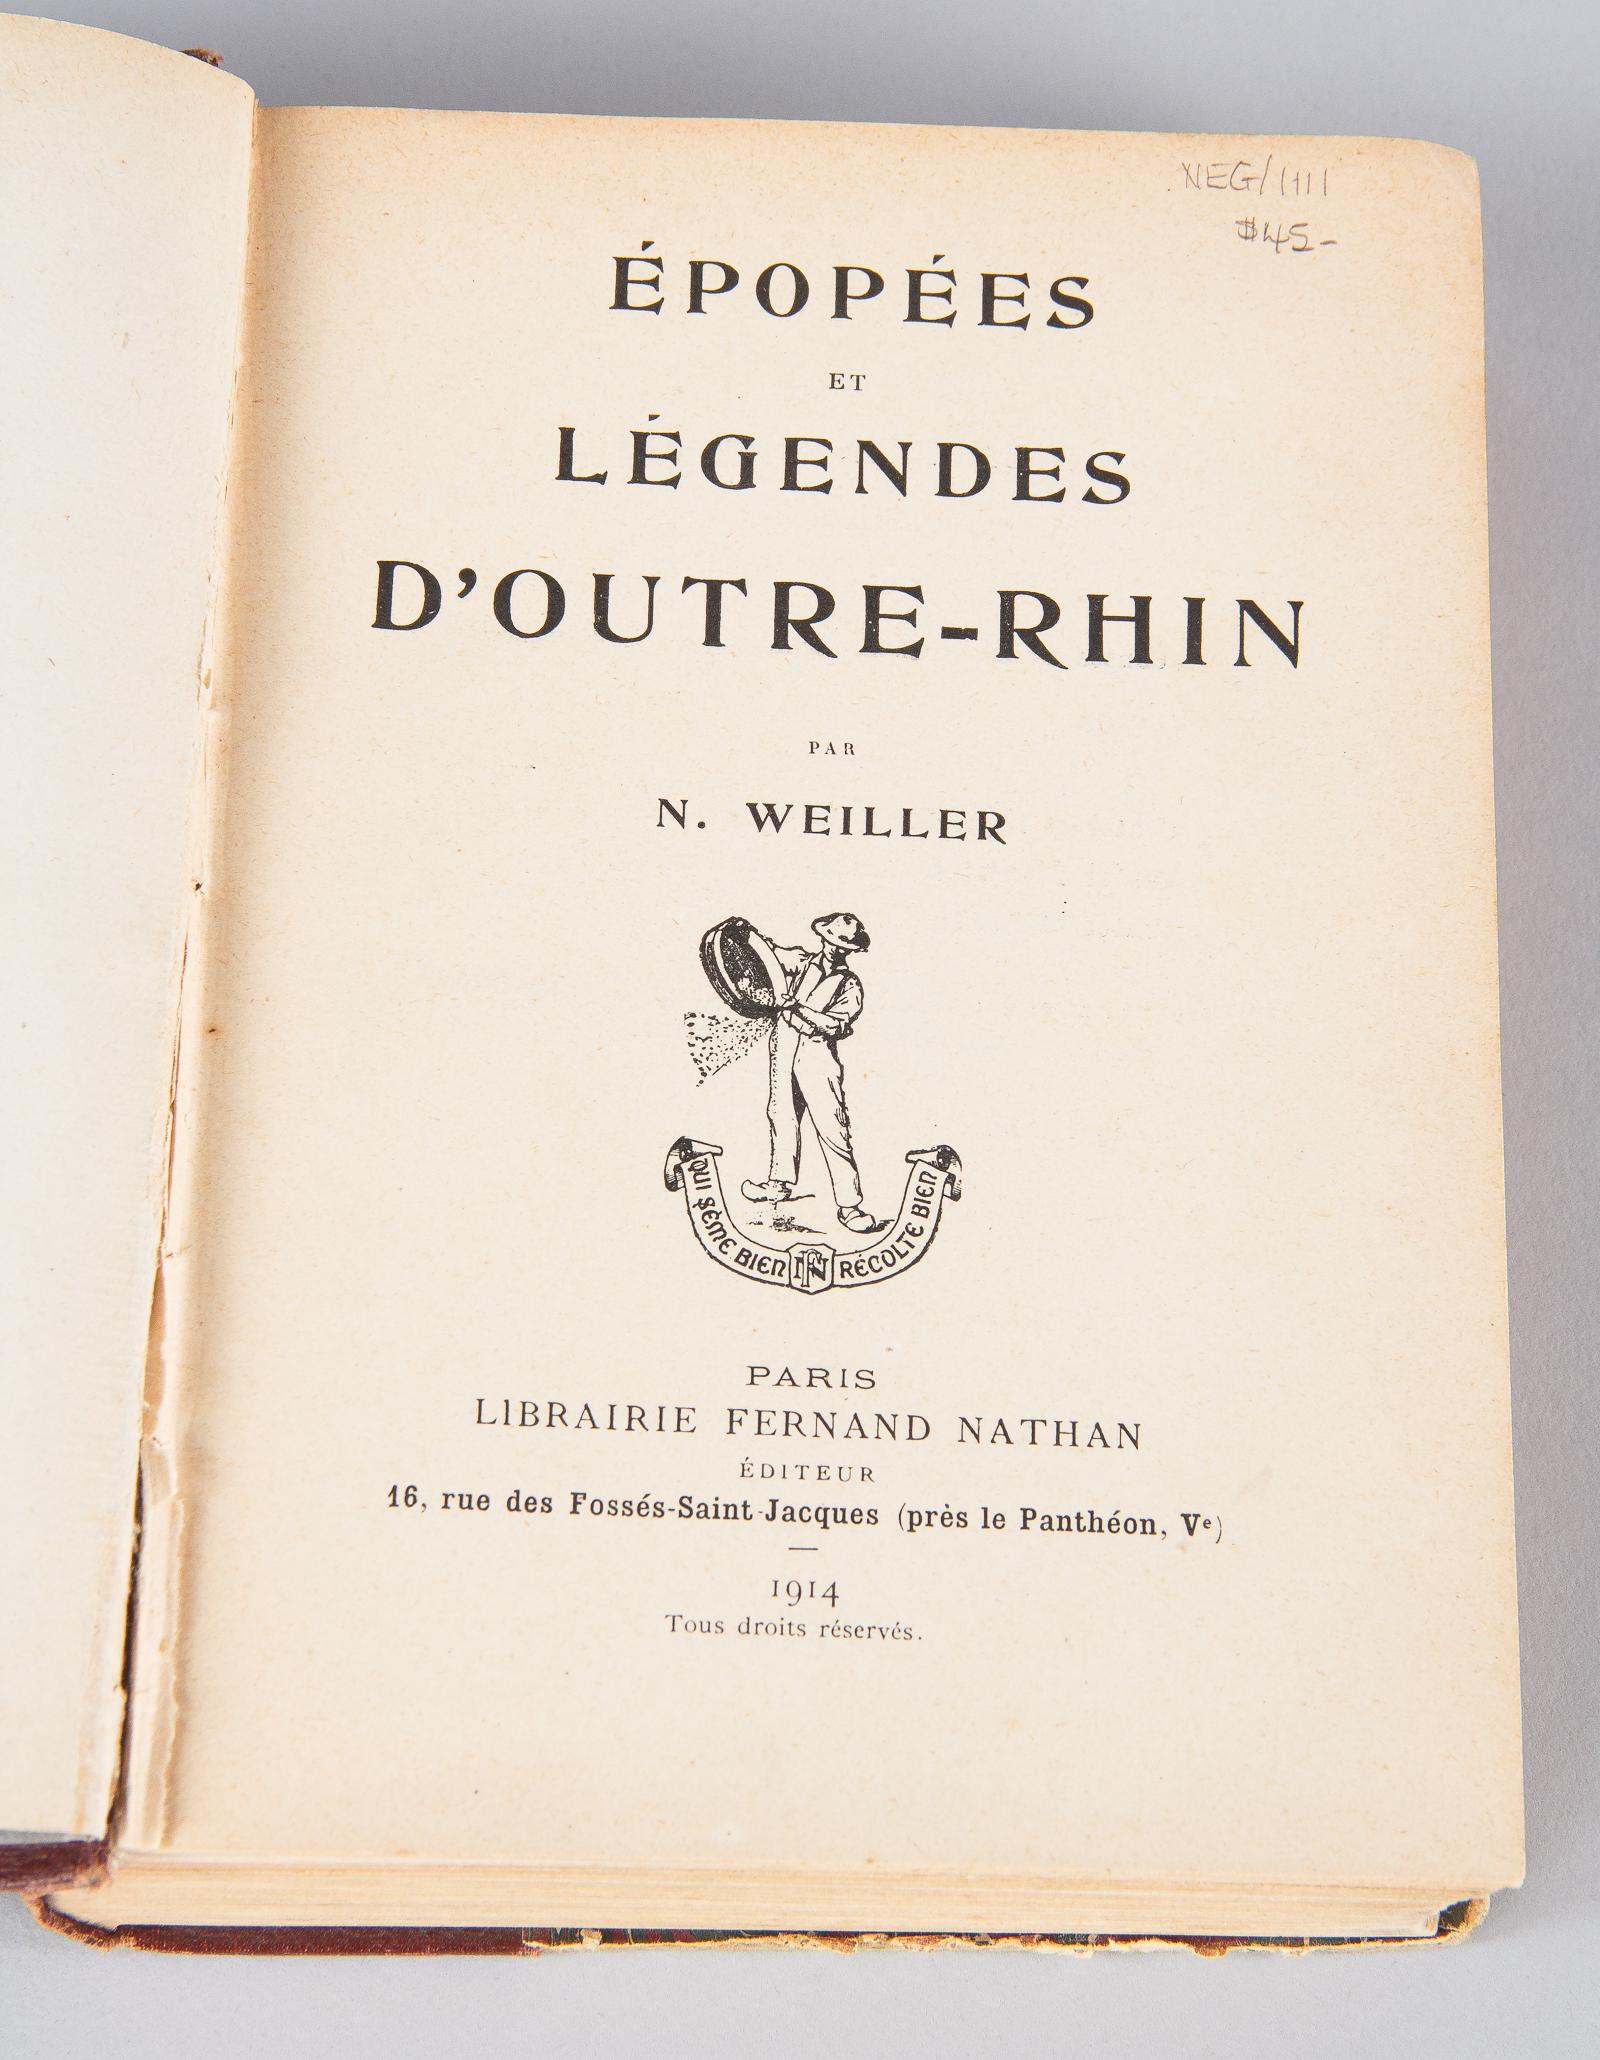 French Book Epopees et Legendes d'Outre-Rhin by N. Weiller, 1914 For Sale 2